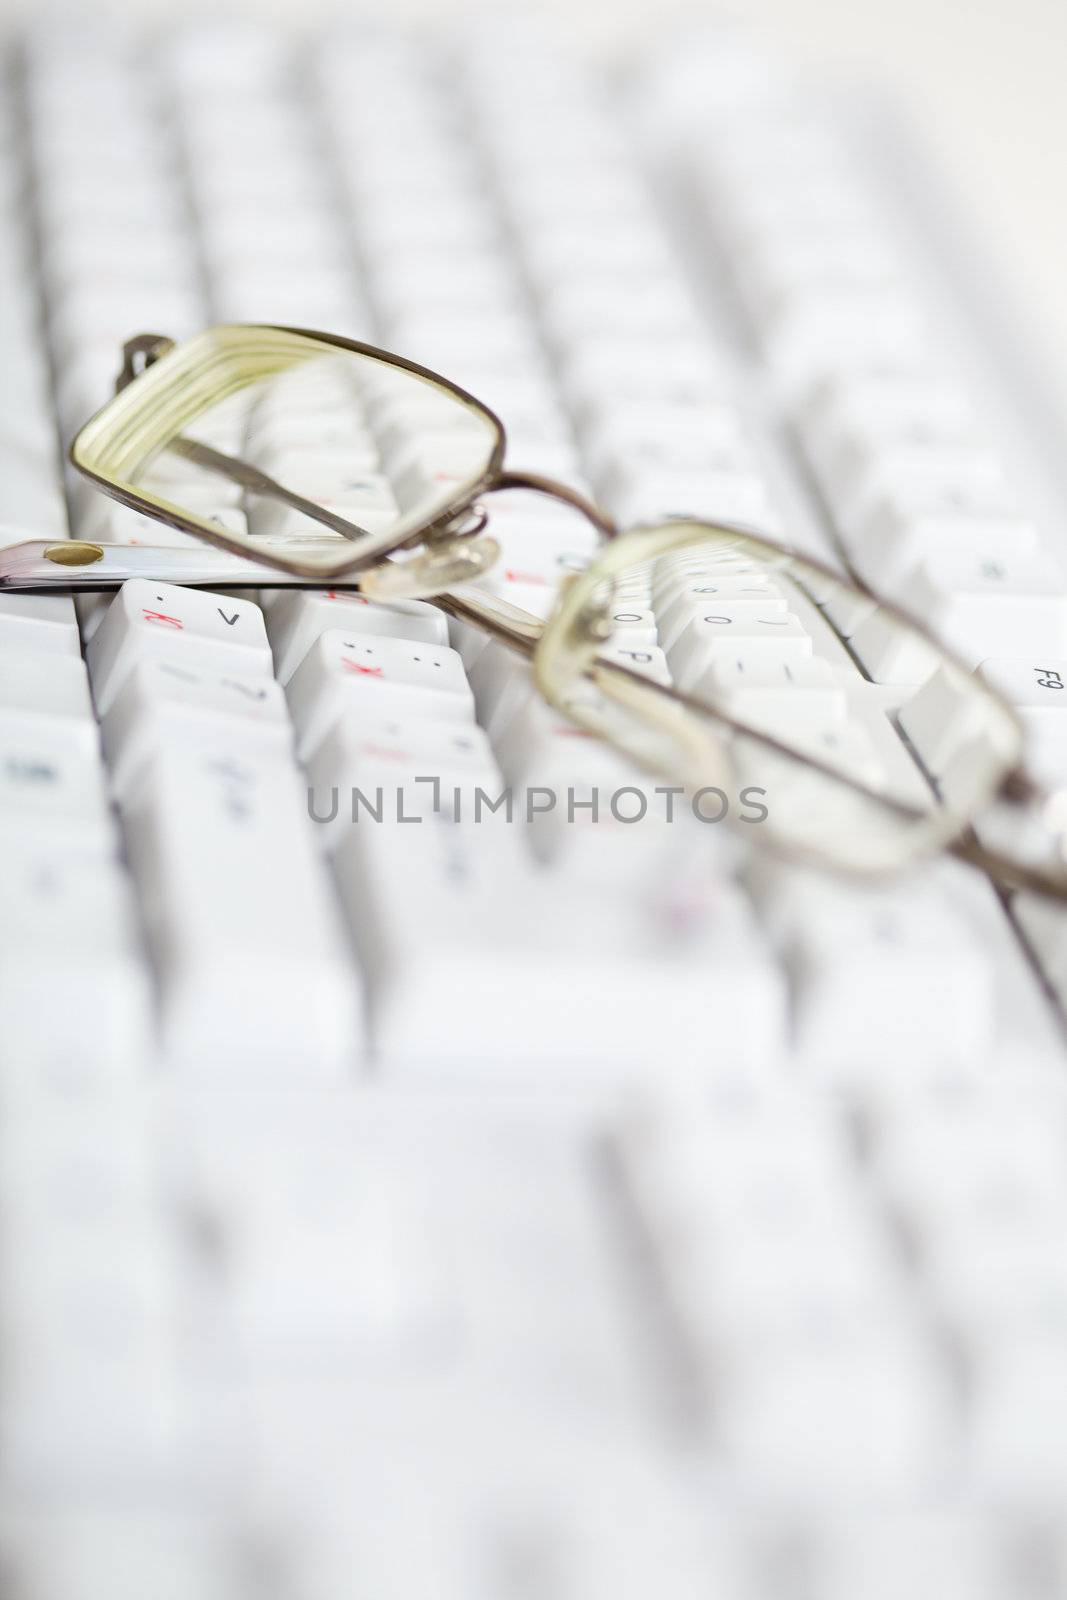 Spectacles are on the computer keyboard - poor eyesight